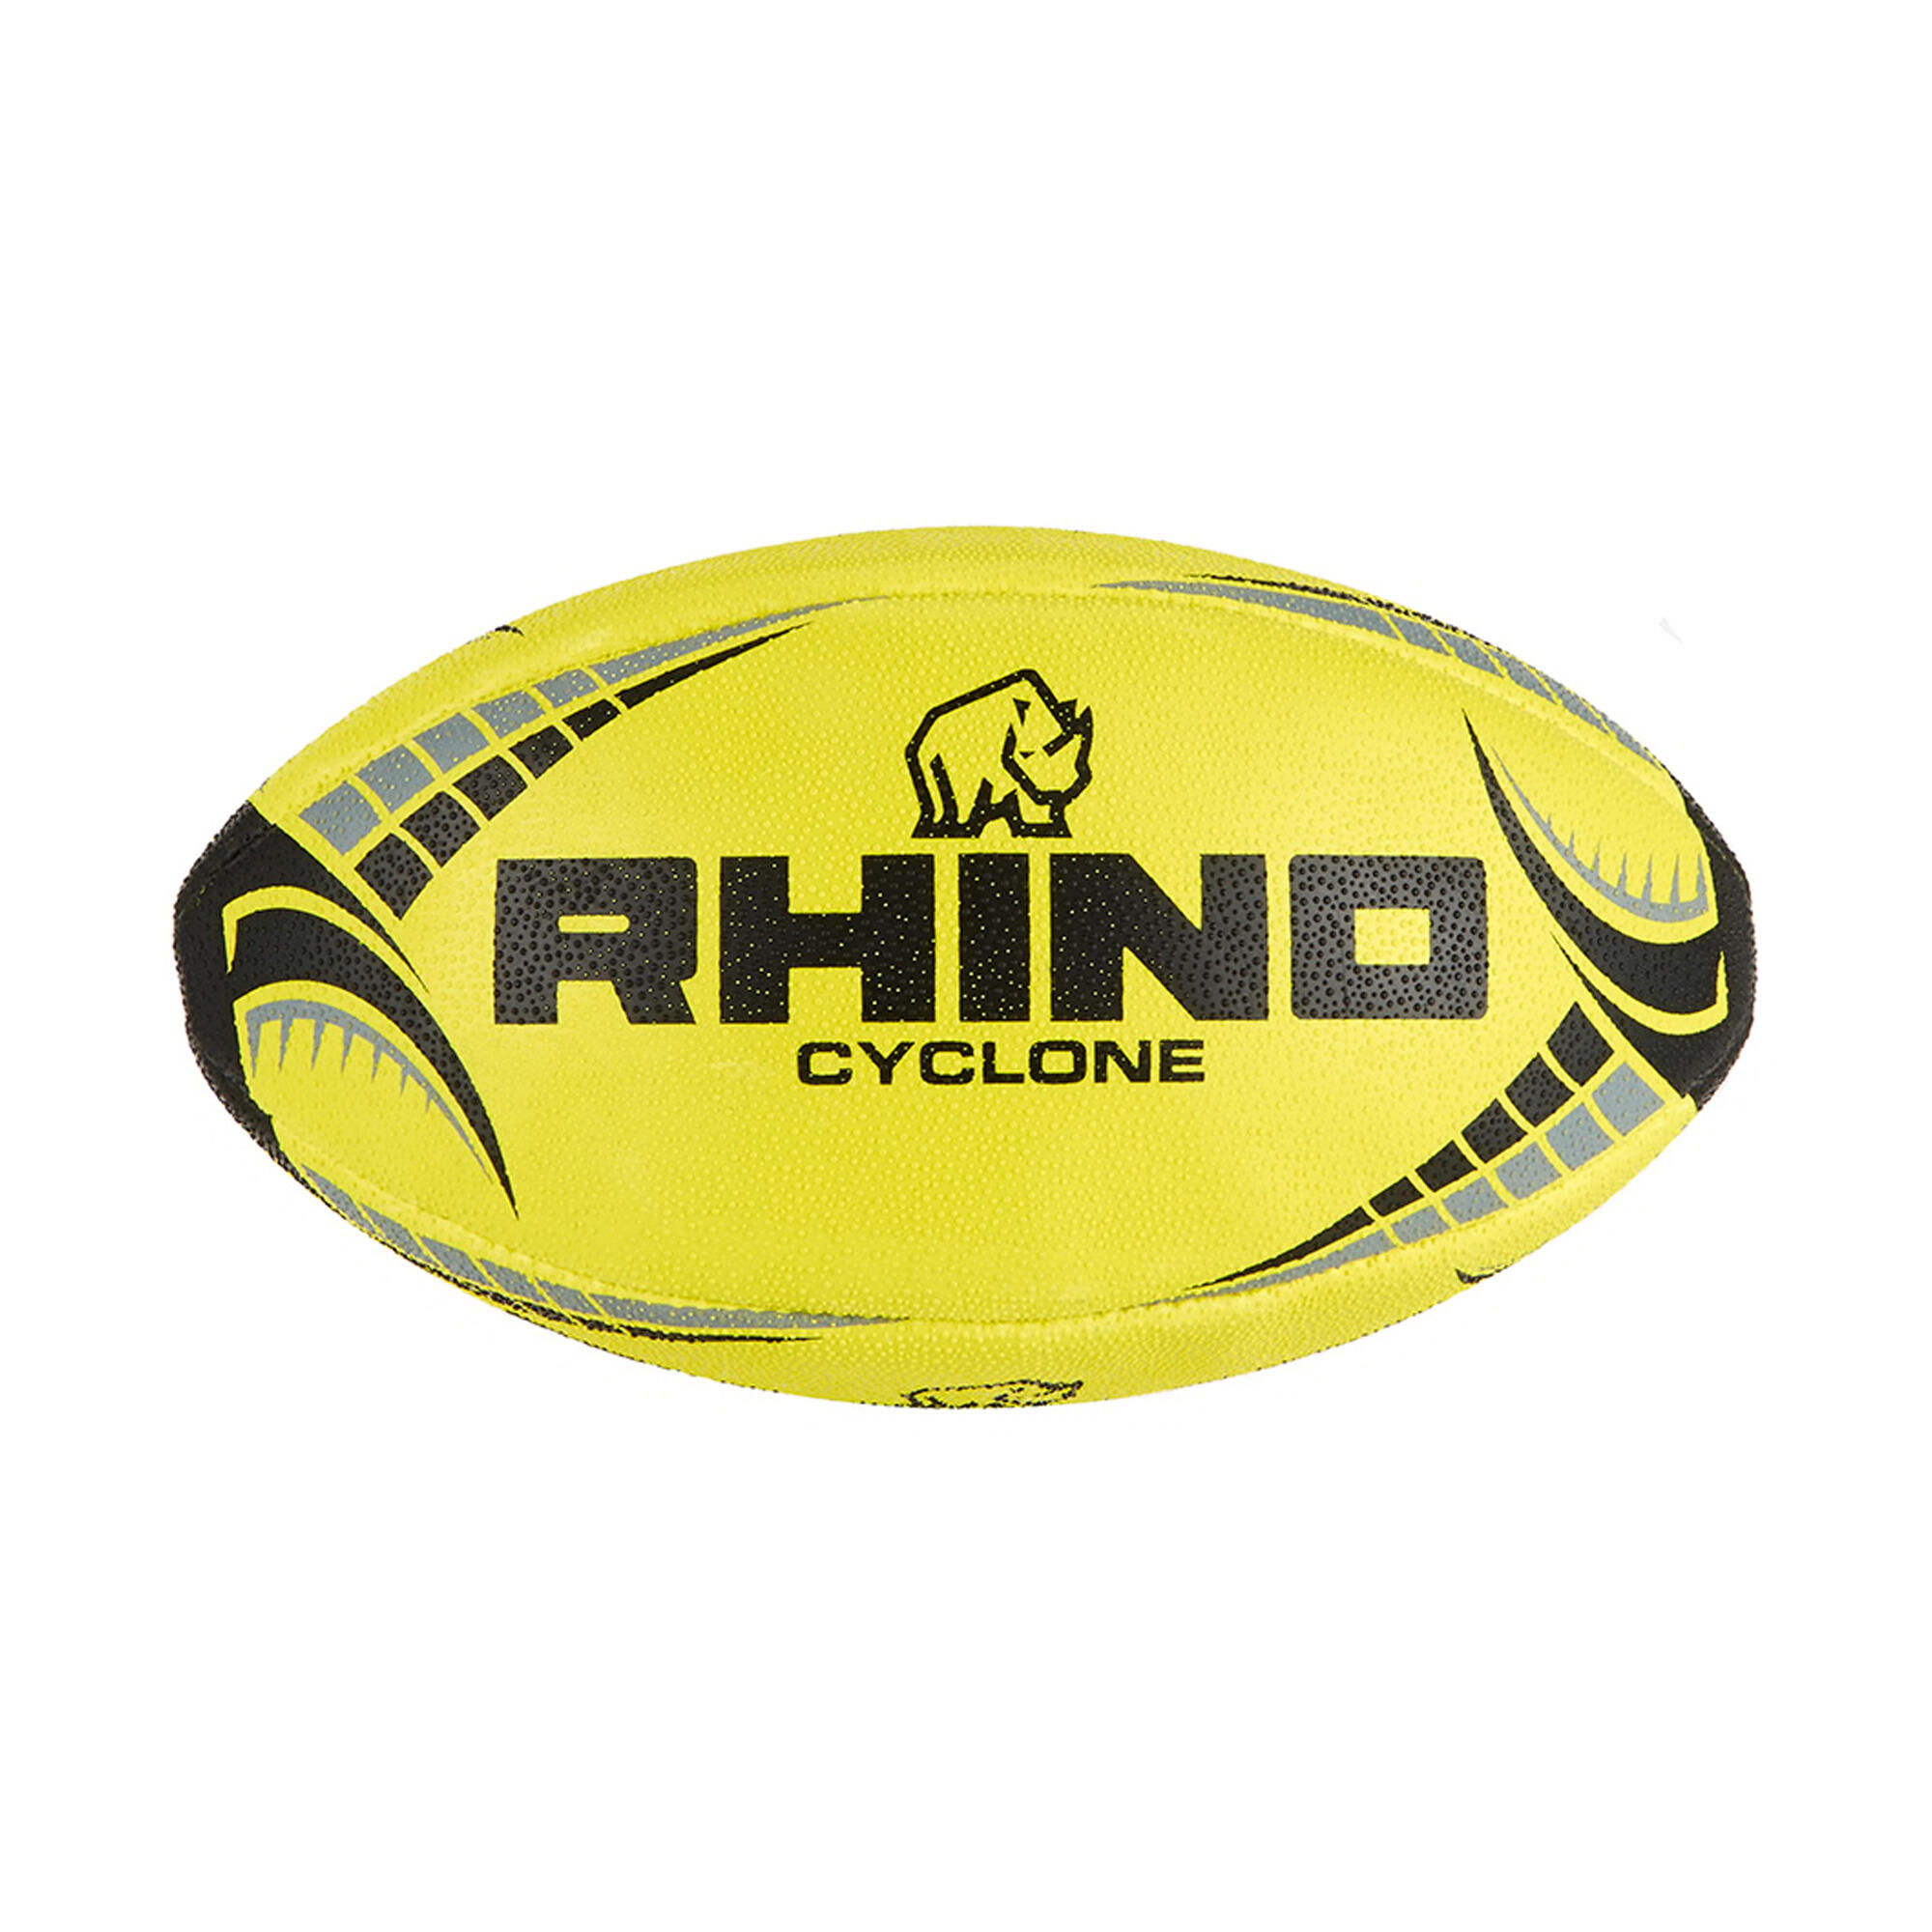 Cyclone Rugby Ball (Fluorescent Yellow) 2/3